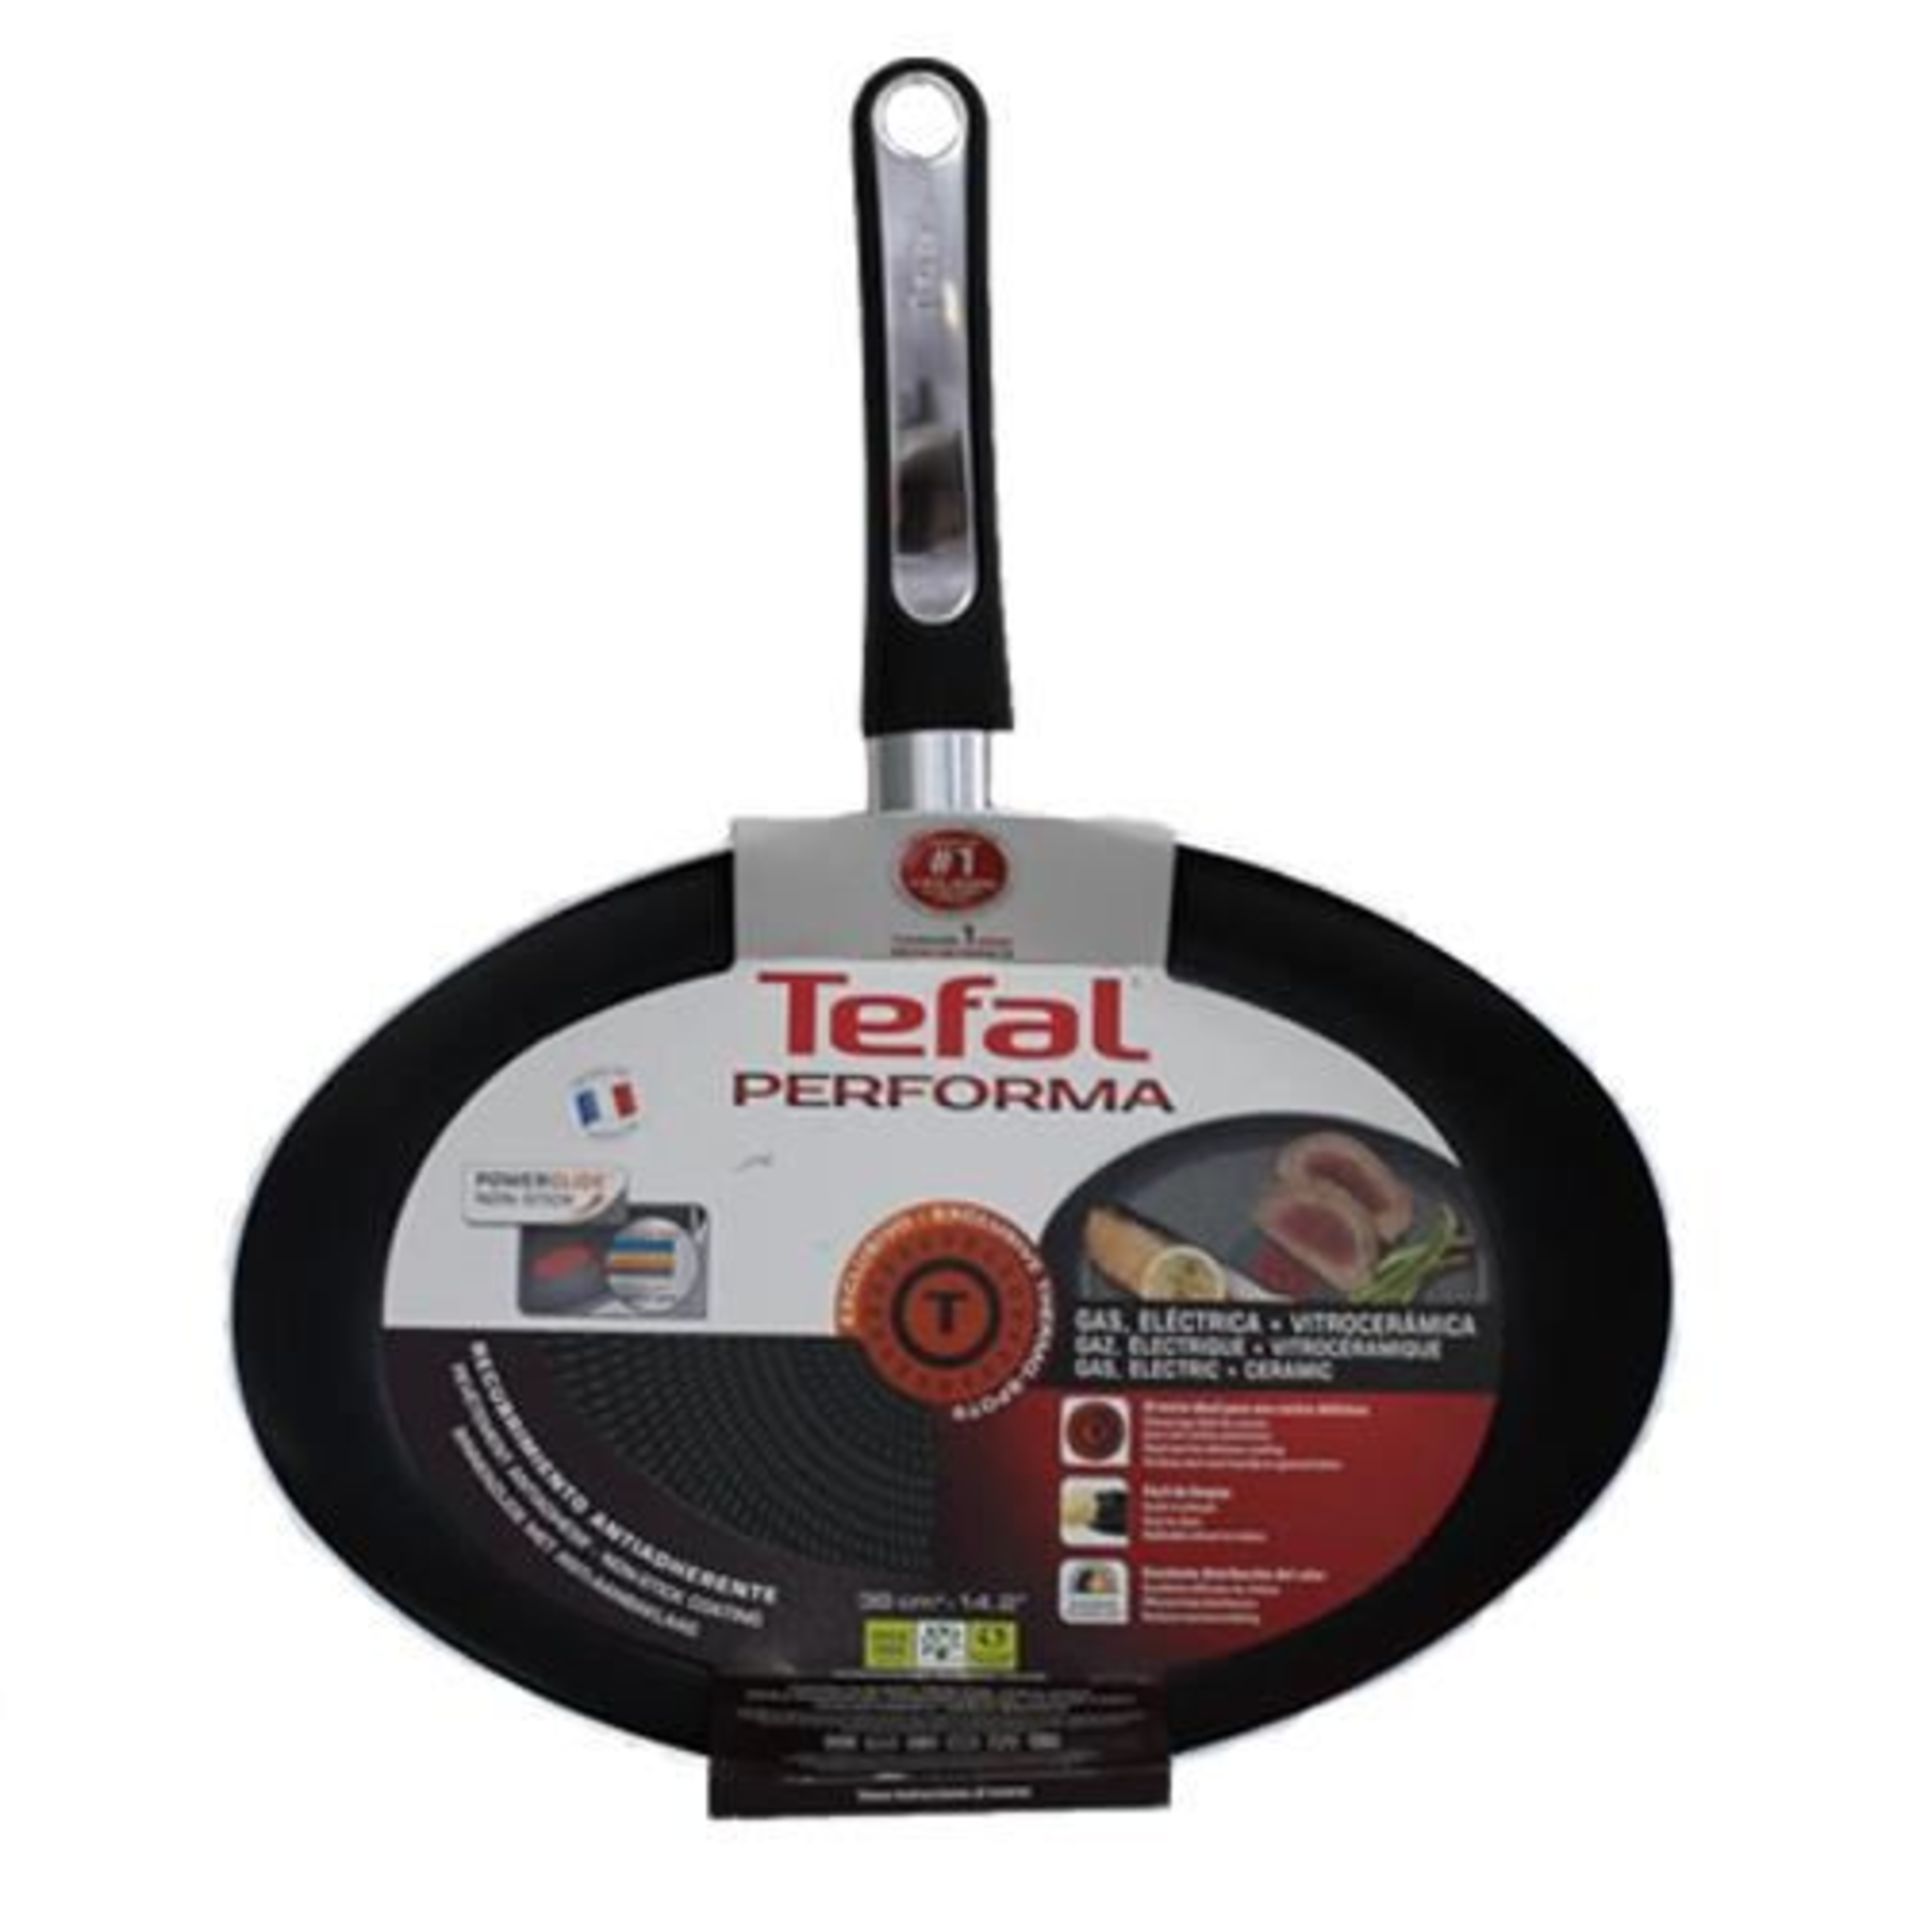 V Brand New Tefal Performa Fish Fry Pan-36cm-Oval-Power Glide-Non Stick-Thermo Spot-Oven To Cooker